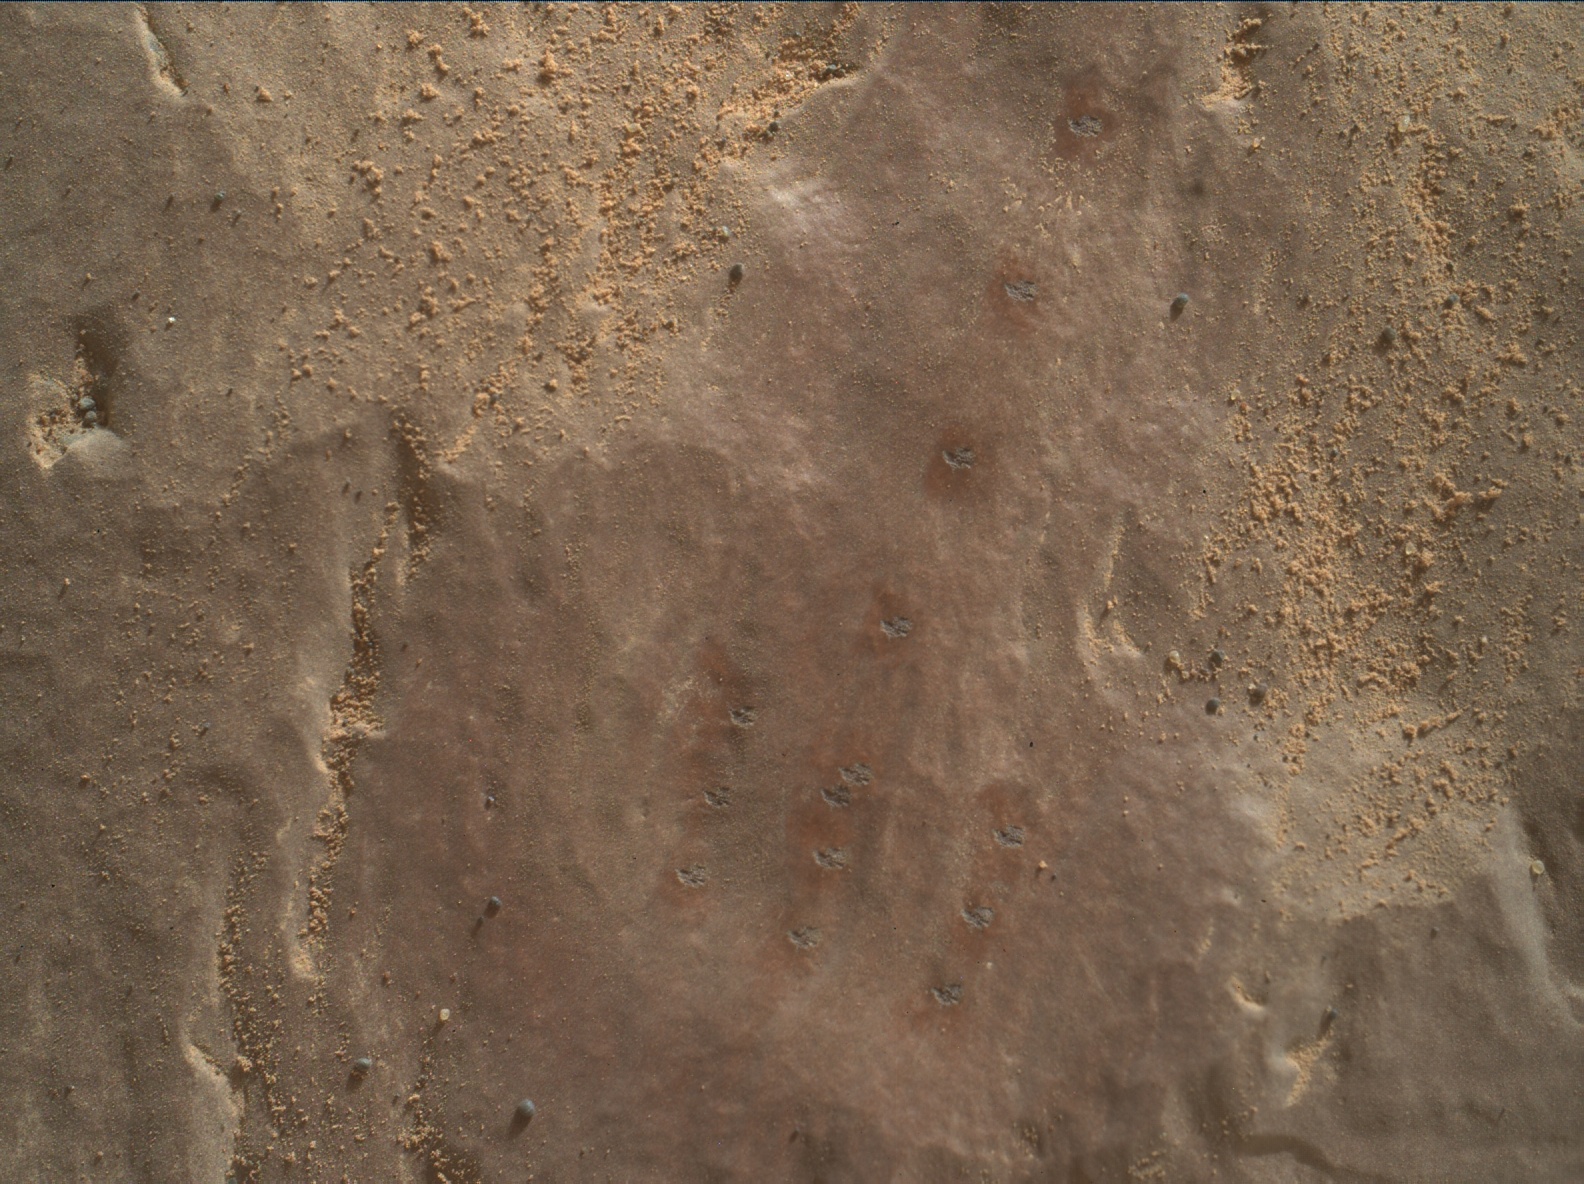 Nasa's Mars rover Curiosity acquired this image using its Mars Hand Lens Imager (MAHLI) on Sol 2363